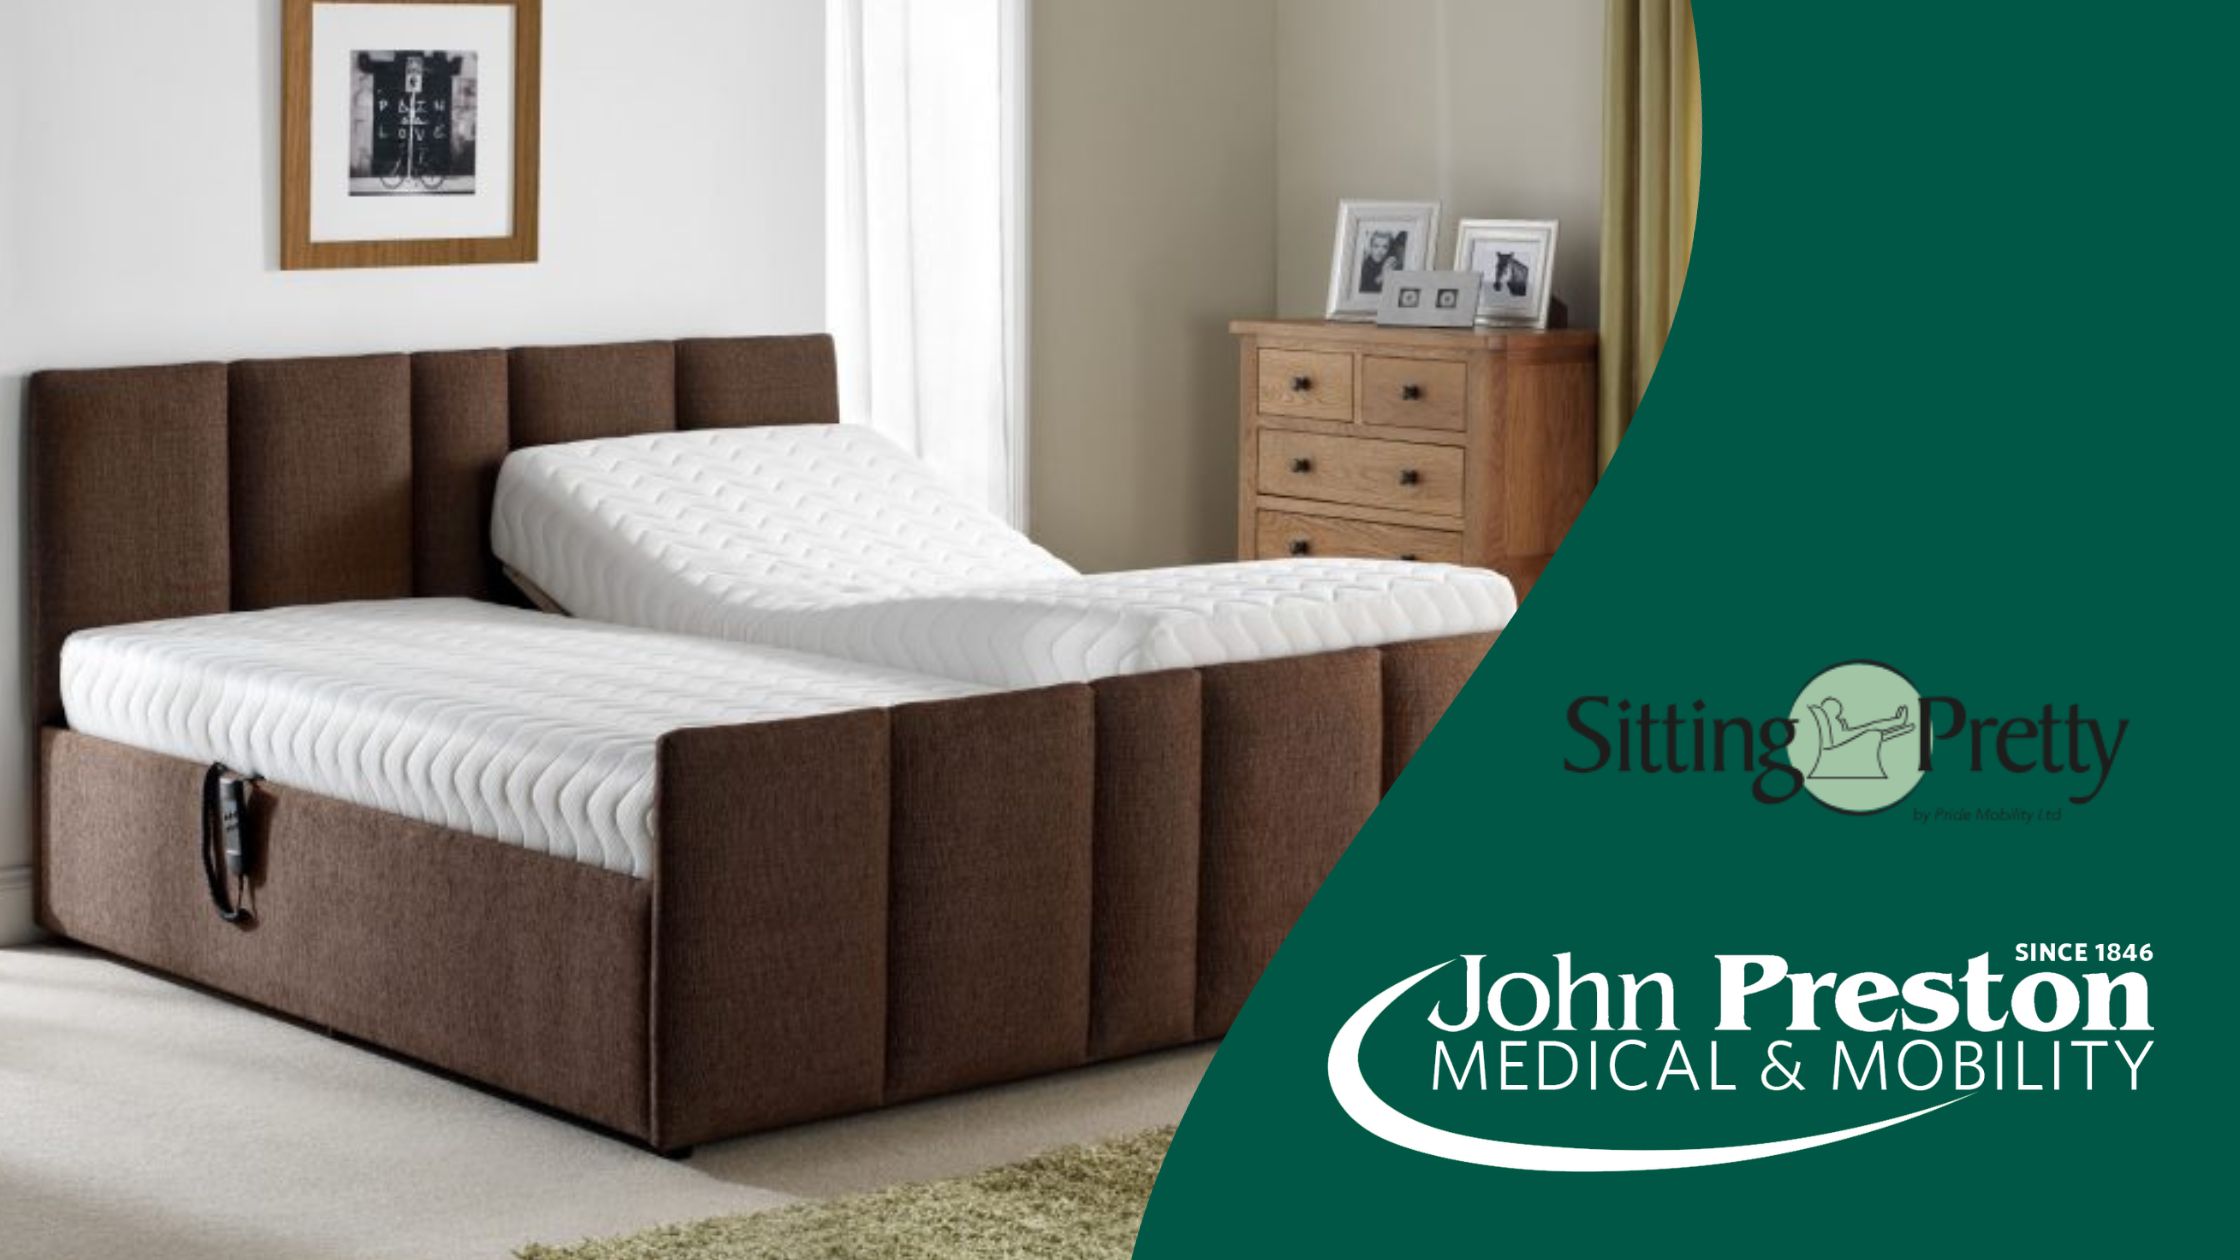 Sleeping Comfortably with Sitting Pretty Adjustable Beds